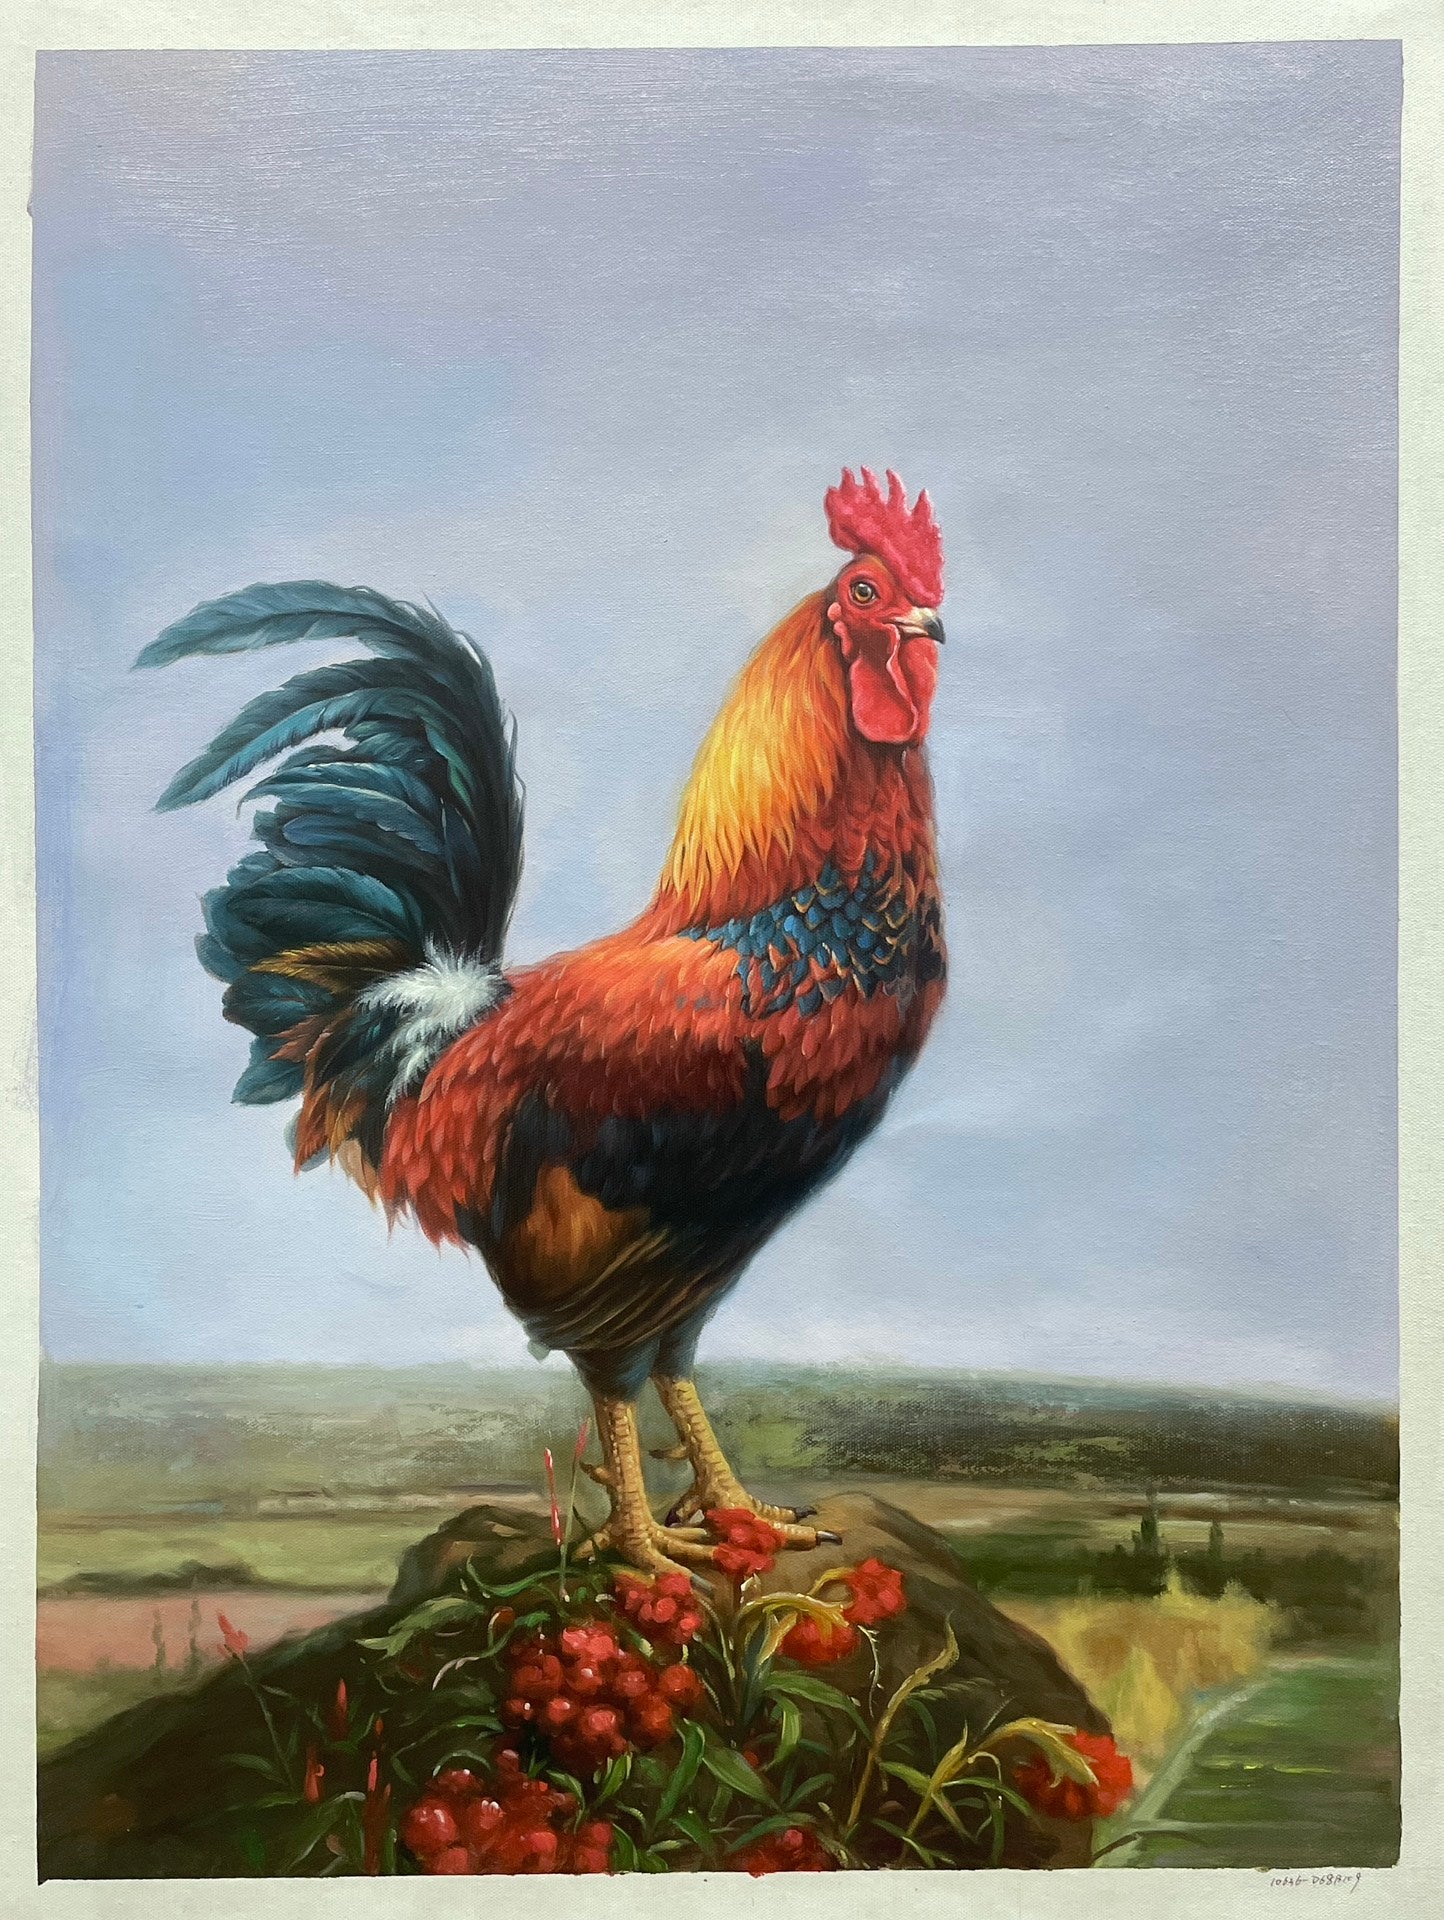 Handmade Rooster Oil Painting 24 by 32 Artwork Beautiful Cock Wall Decor